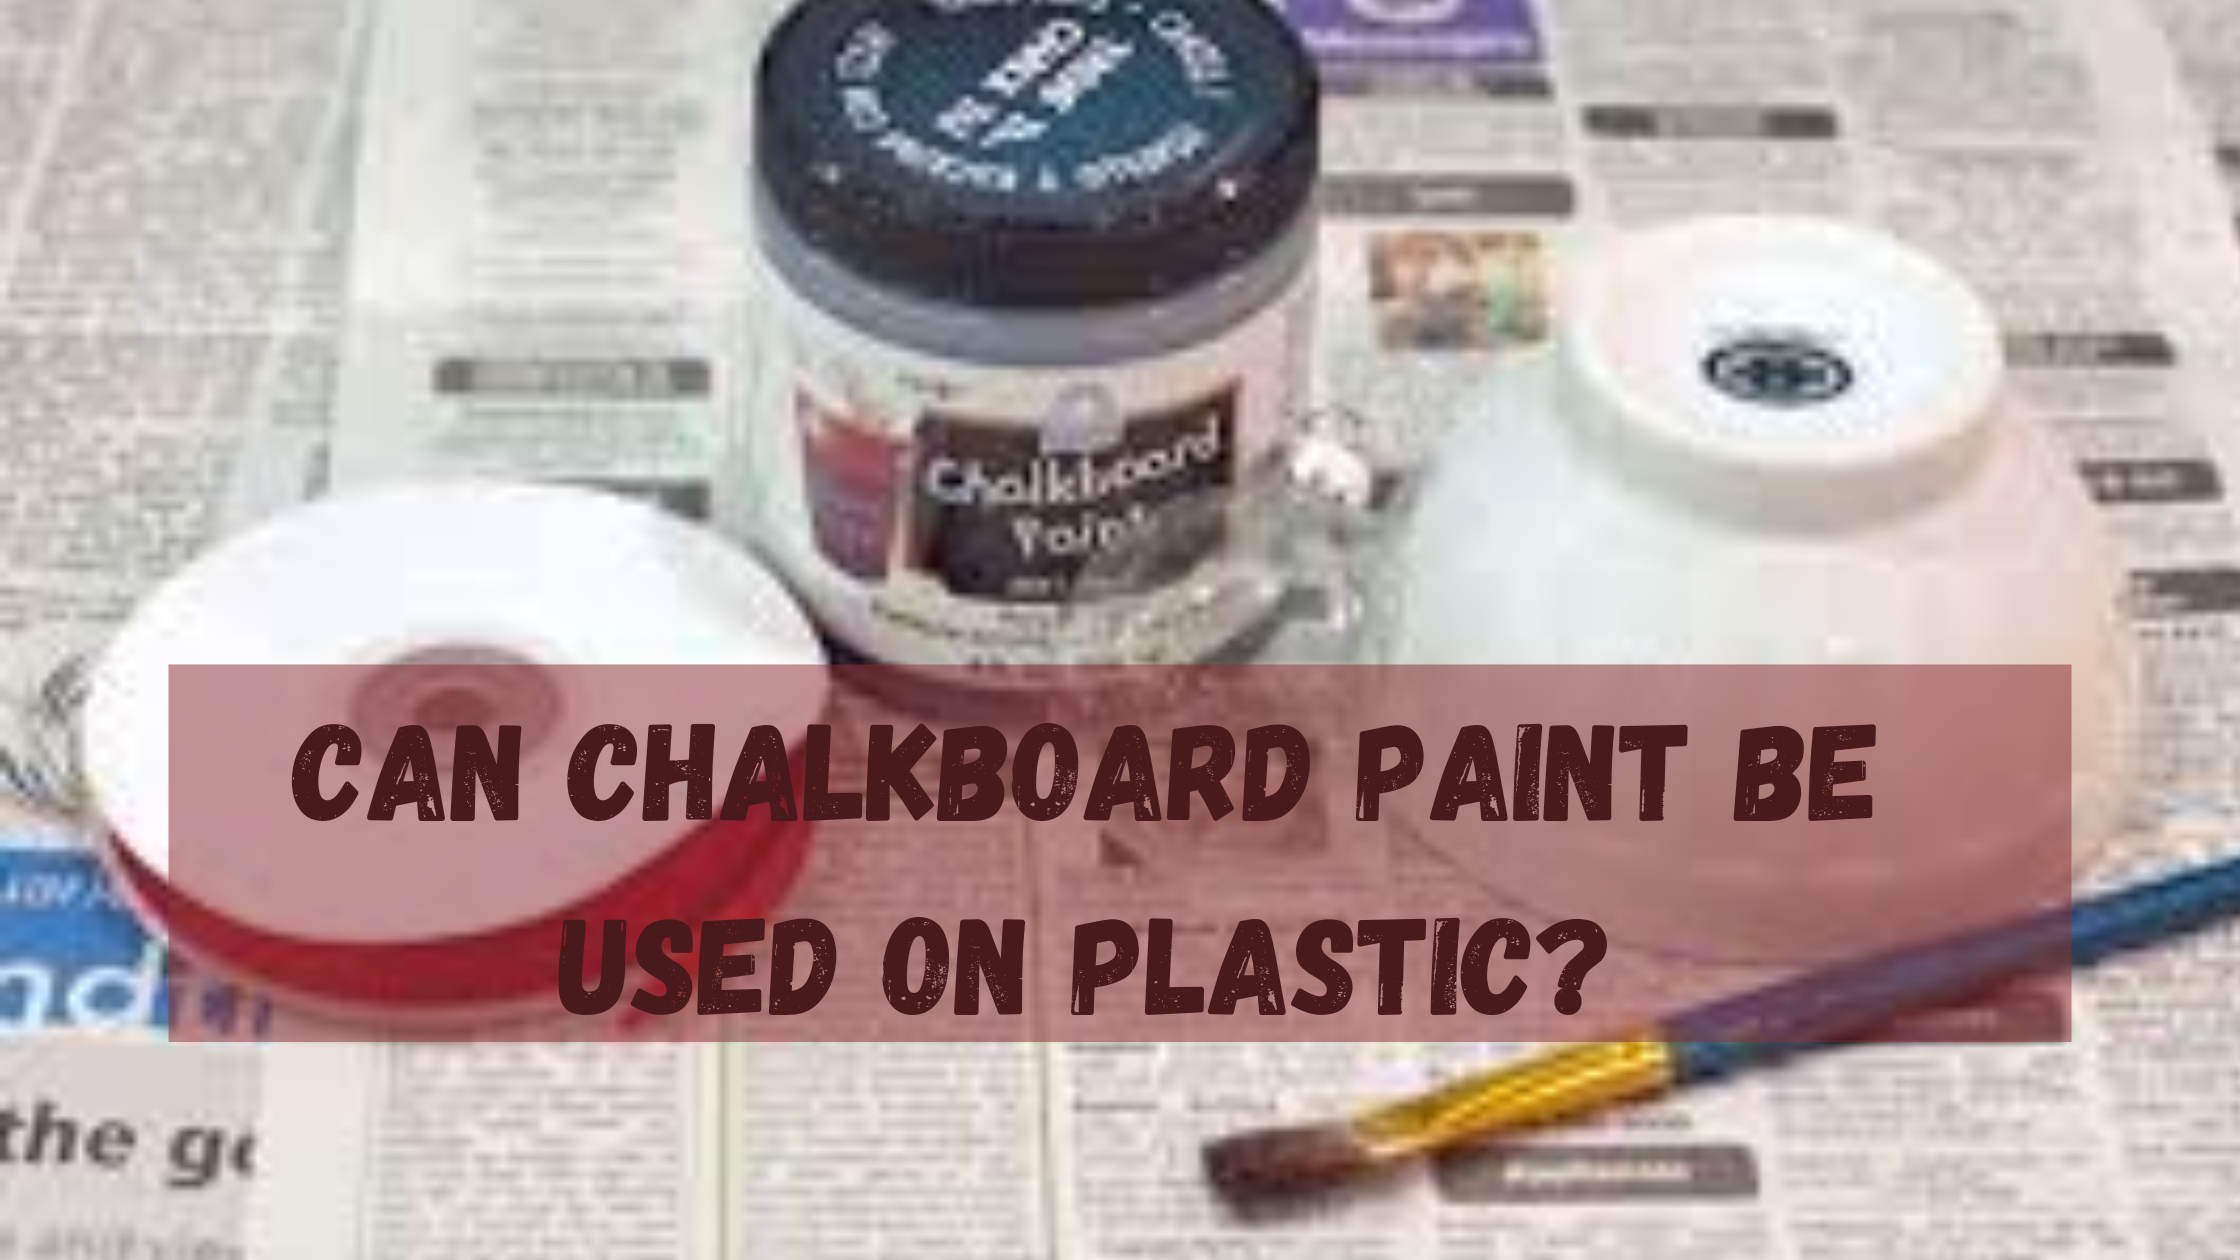 Can Chalkboard Paint Be Used On Plastic?